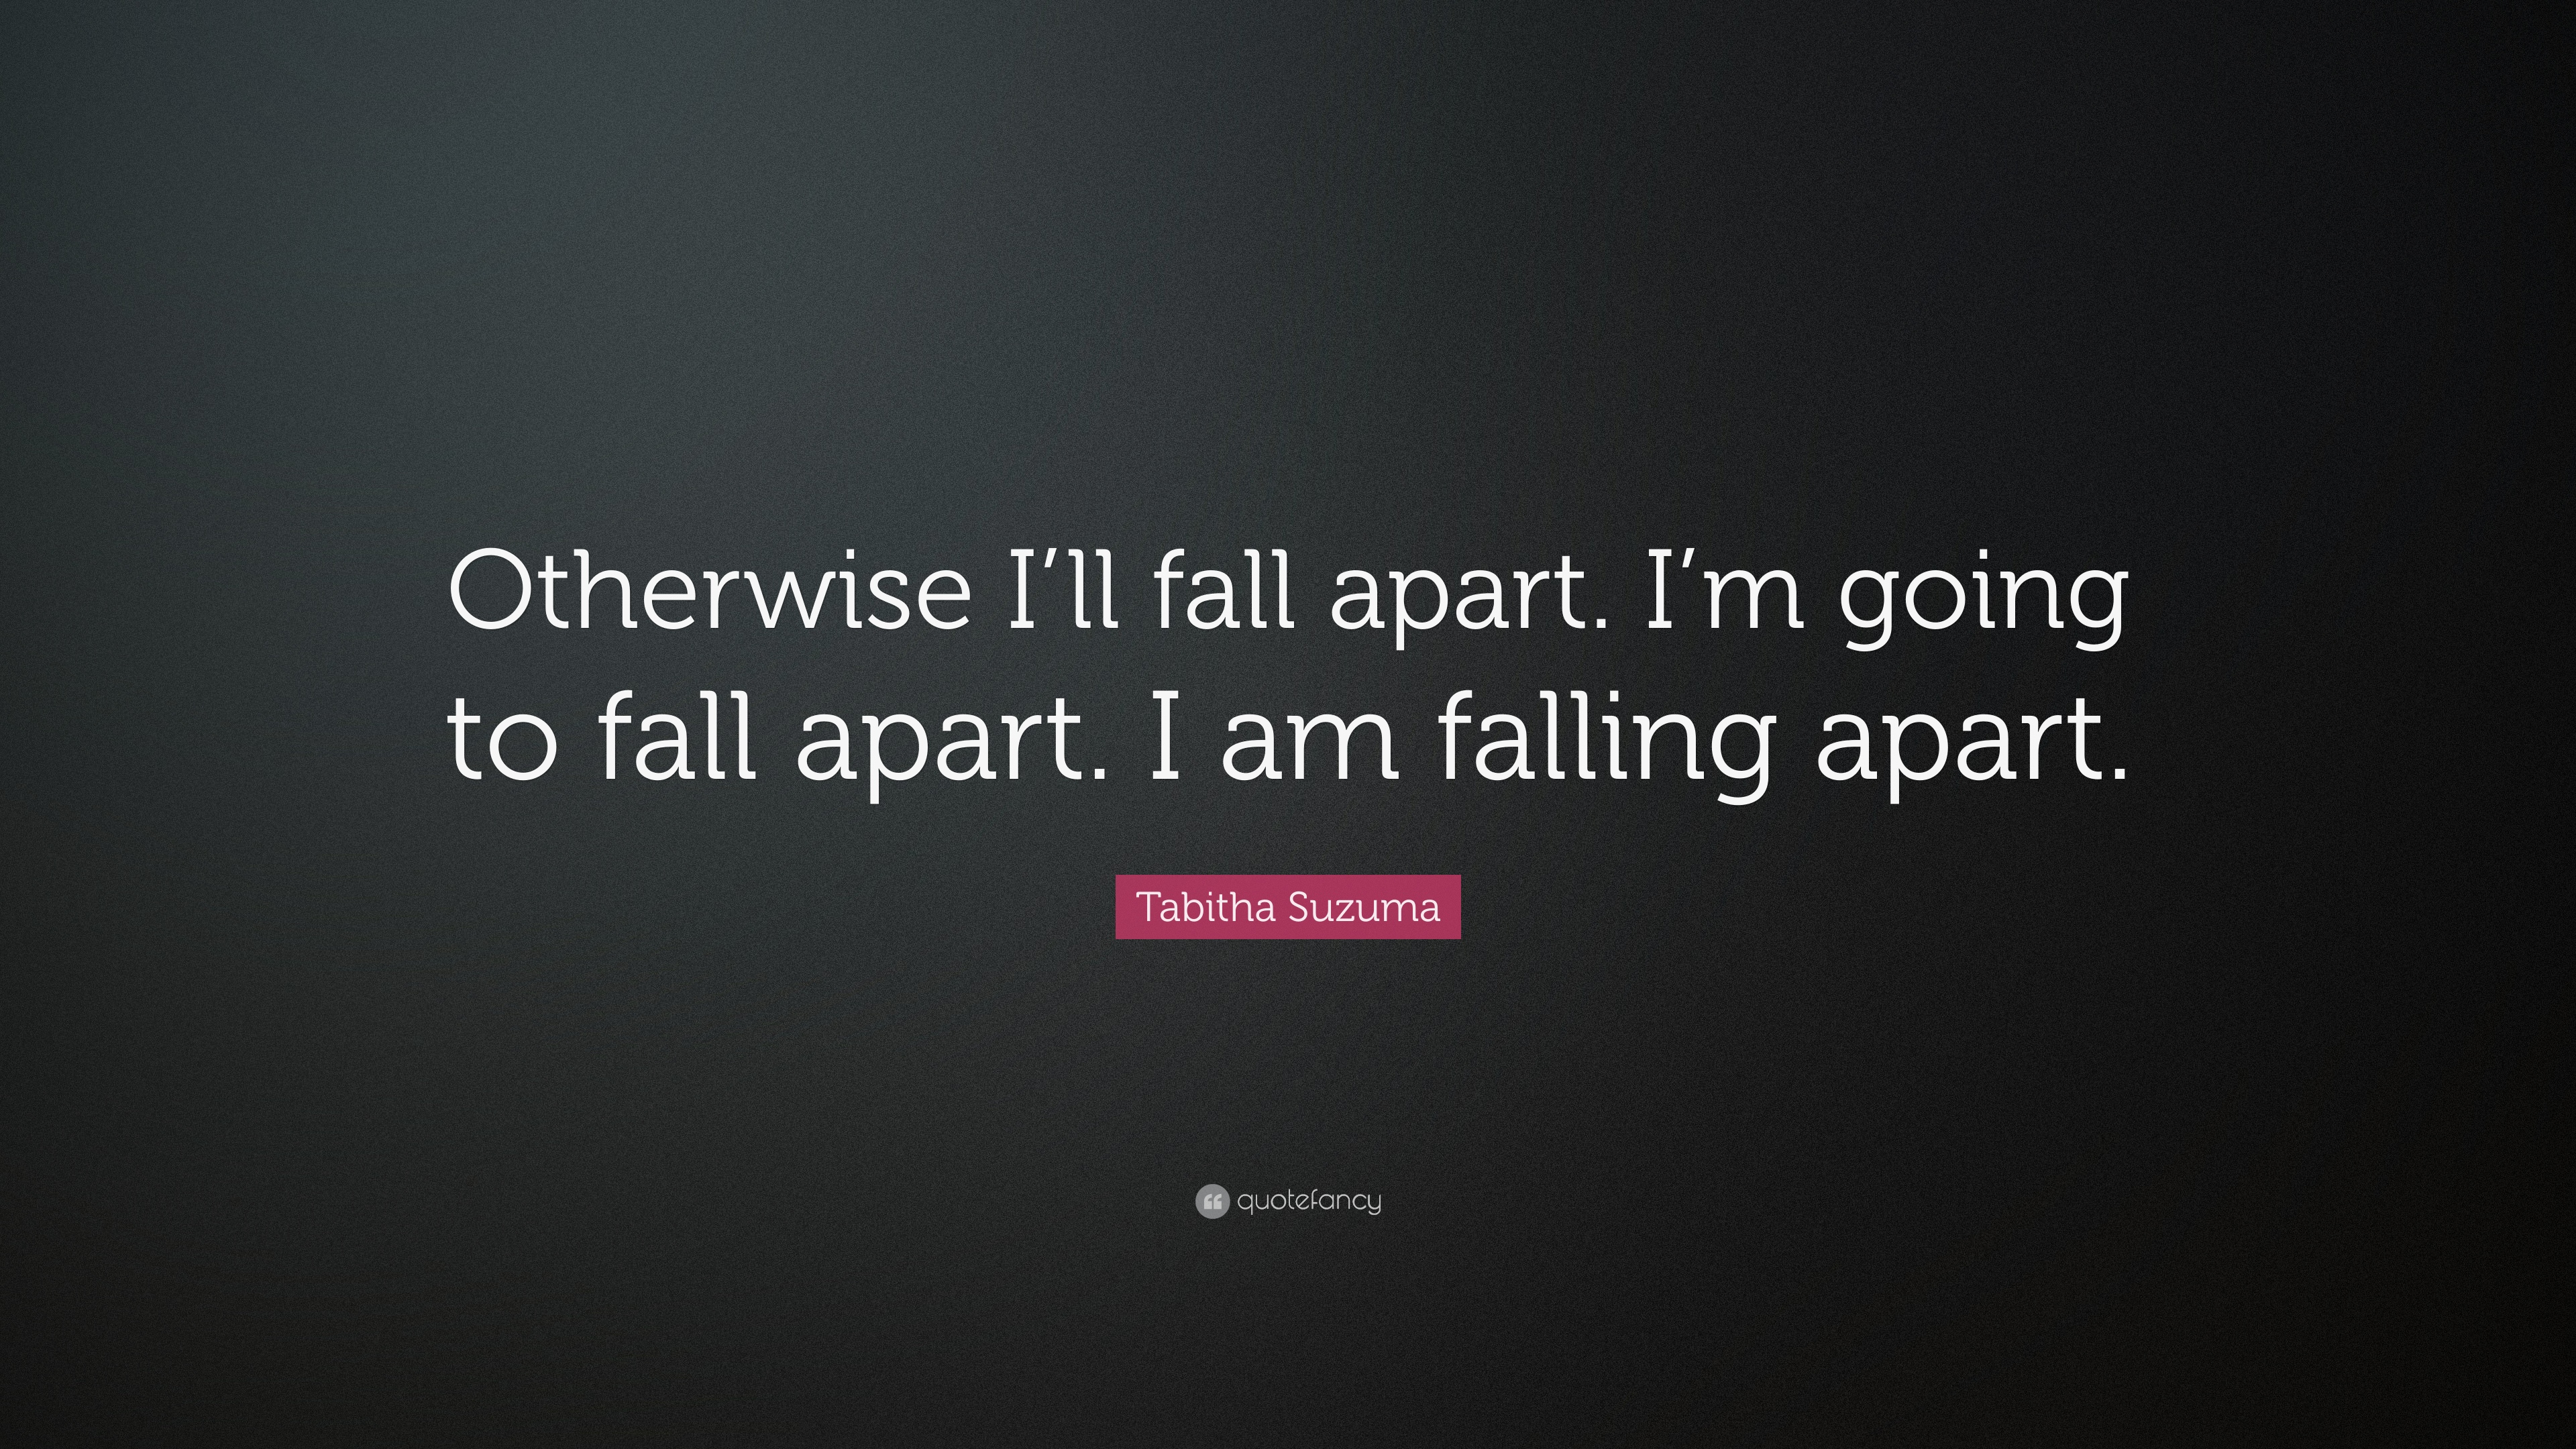 Tabitha Suzuma Quote: “Otherwise I'll fall apart. I'm going to fall ...